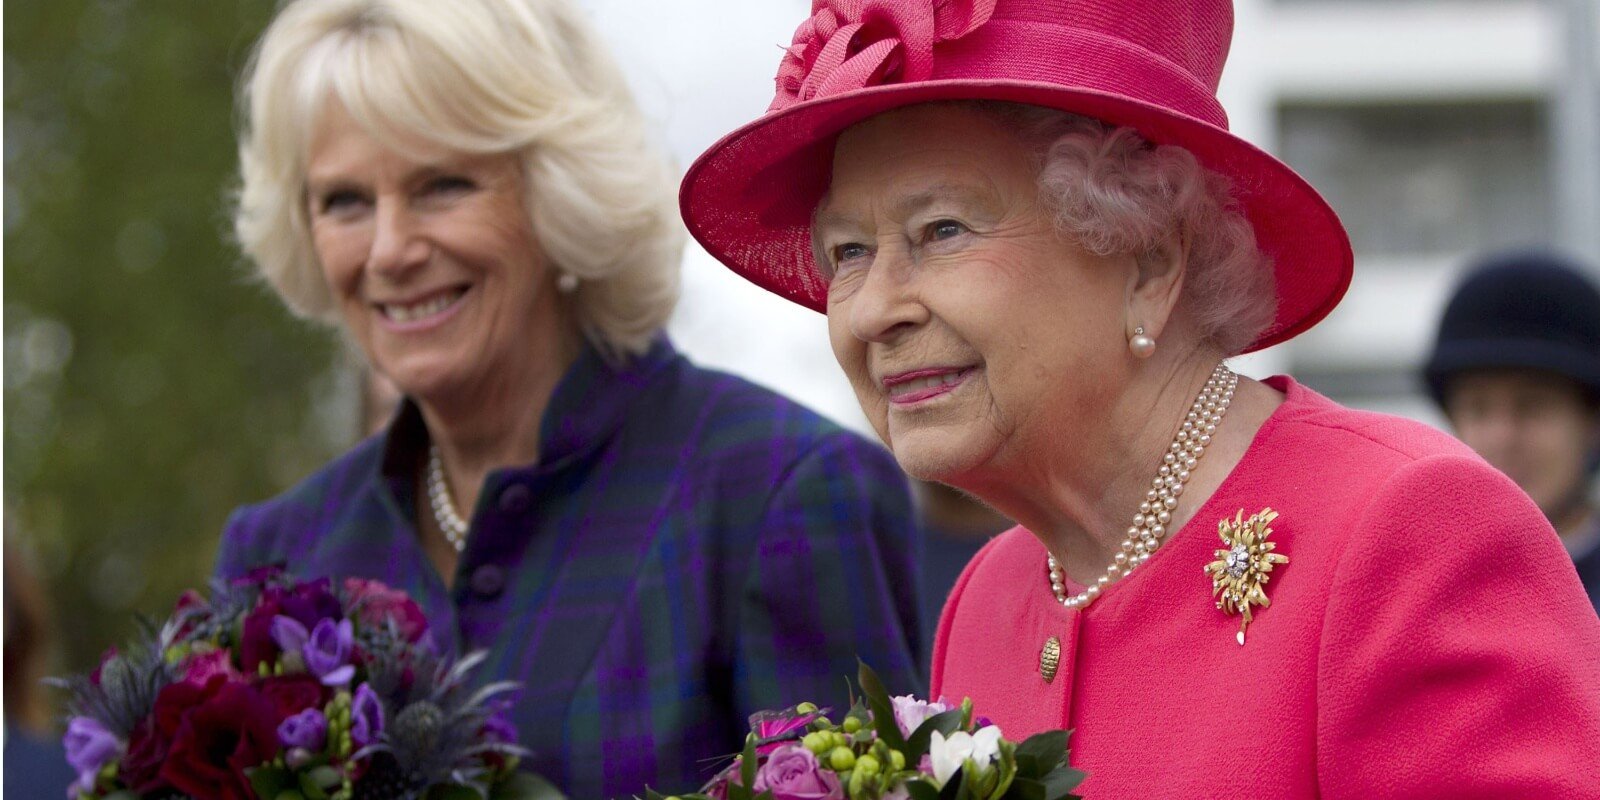 Camilla Parker Bowles honors Queen Elizabeth at her coronation by wearing one of her robes.